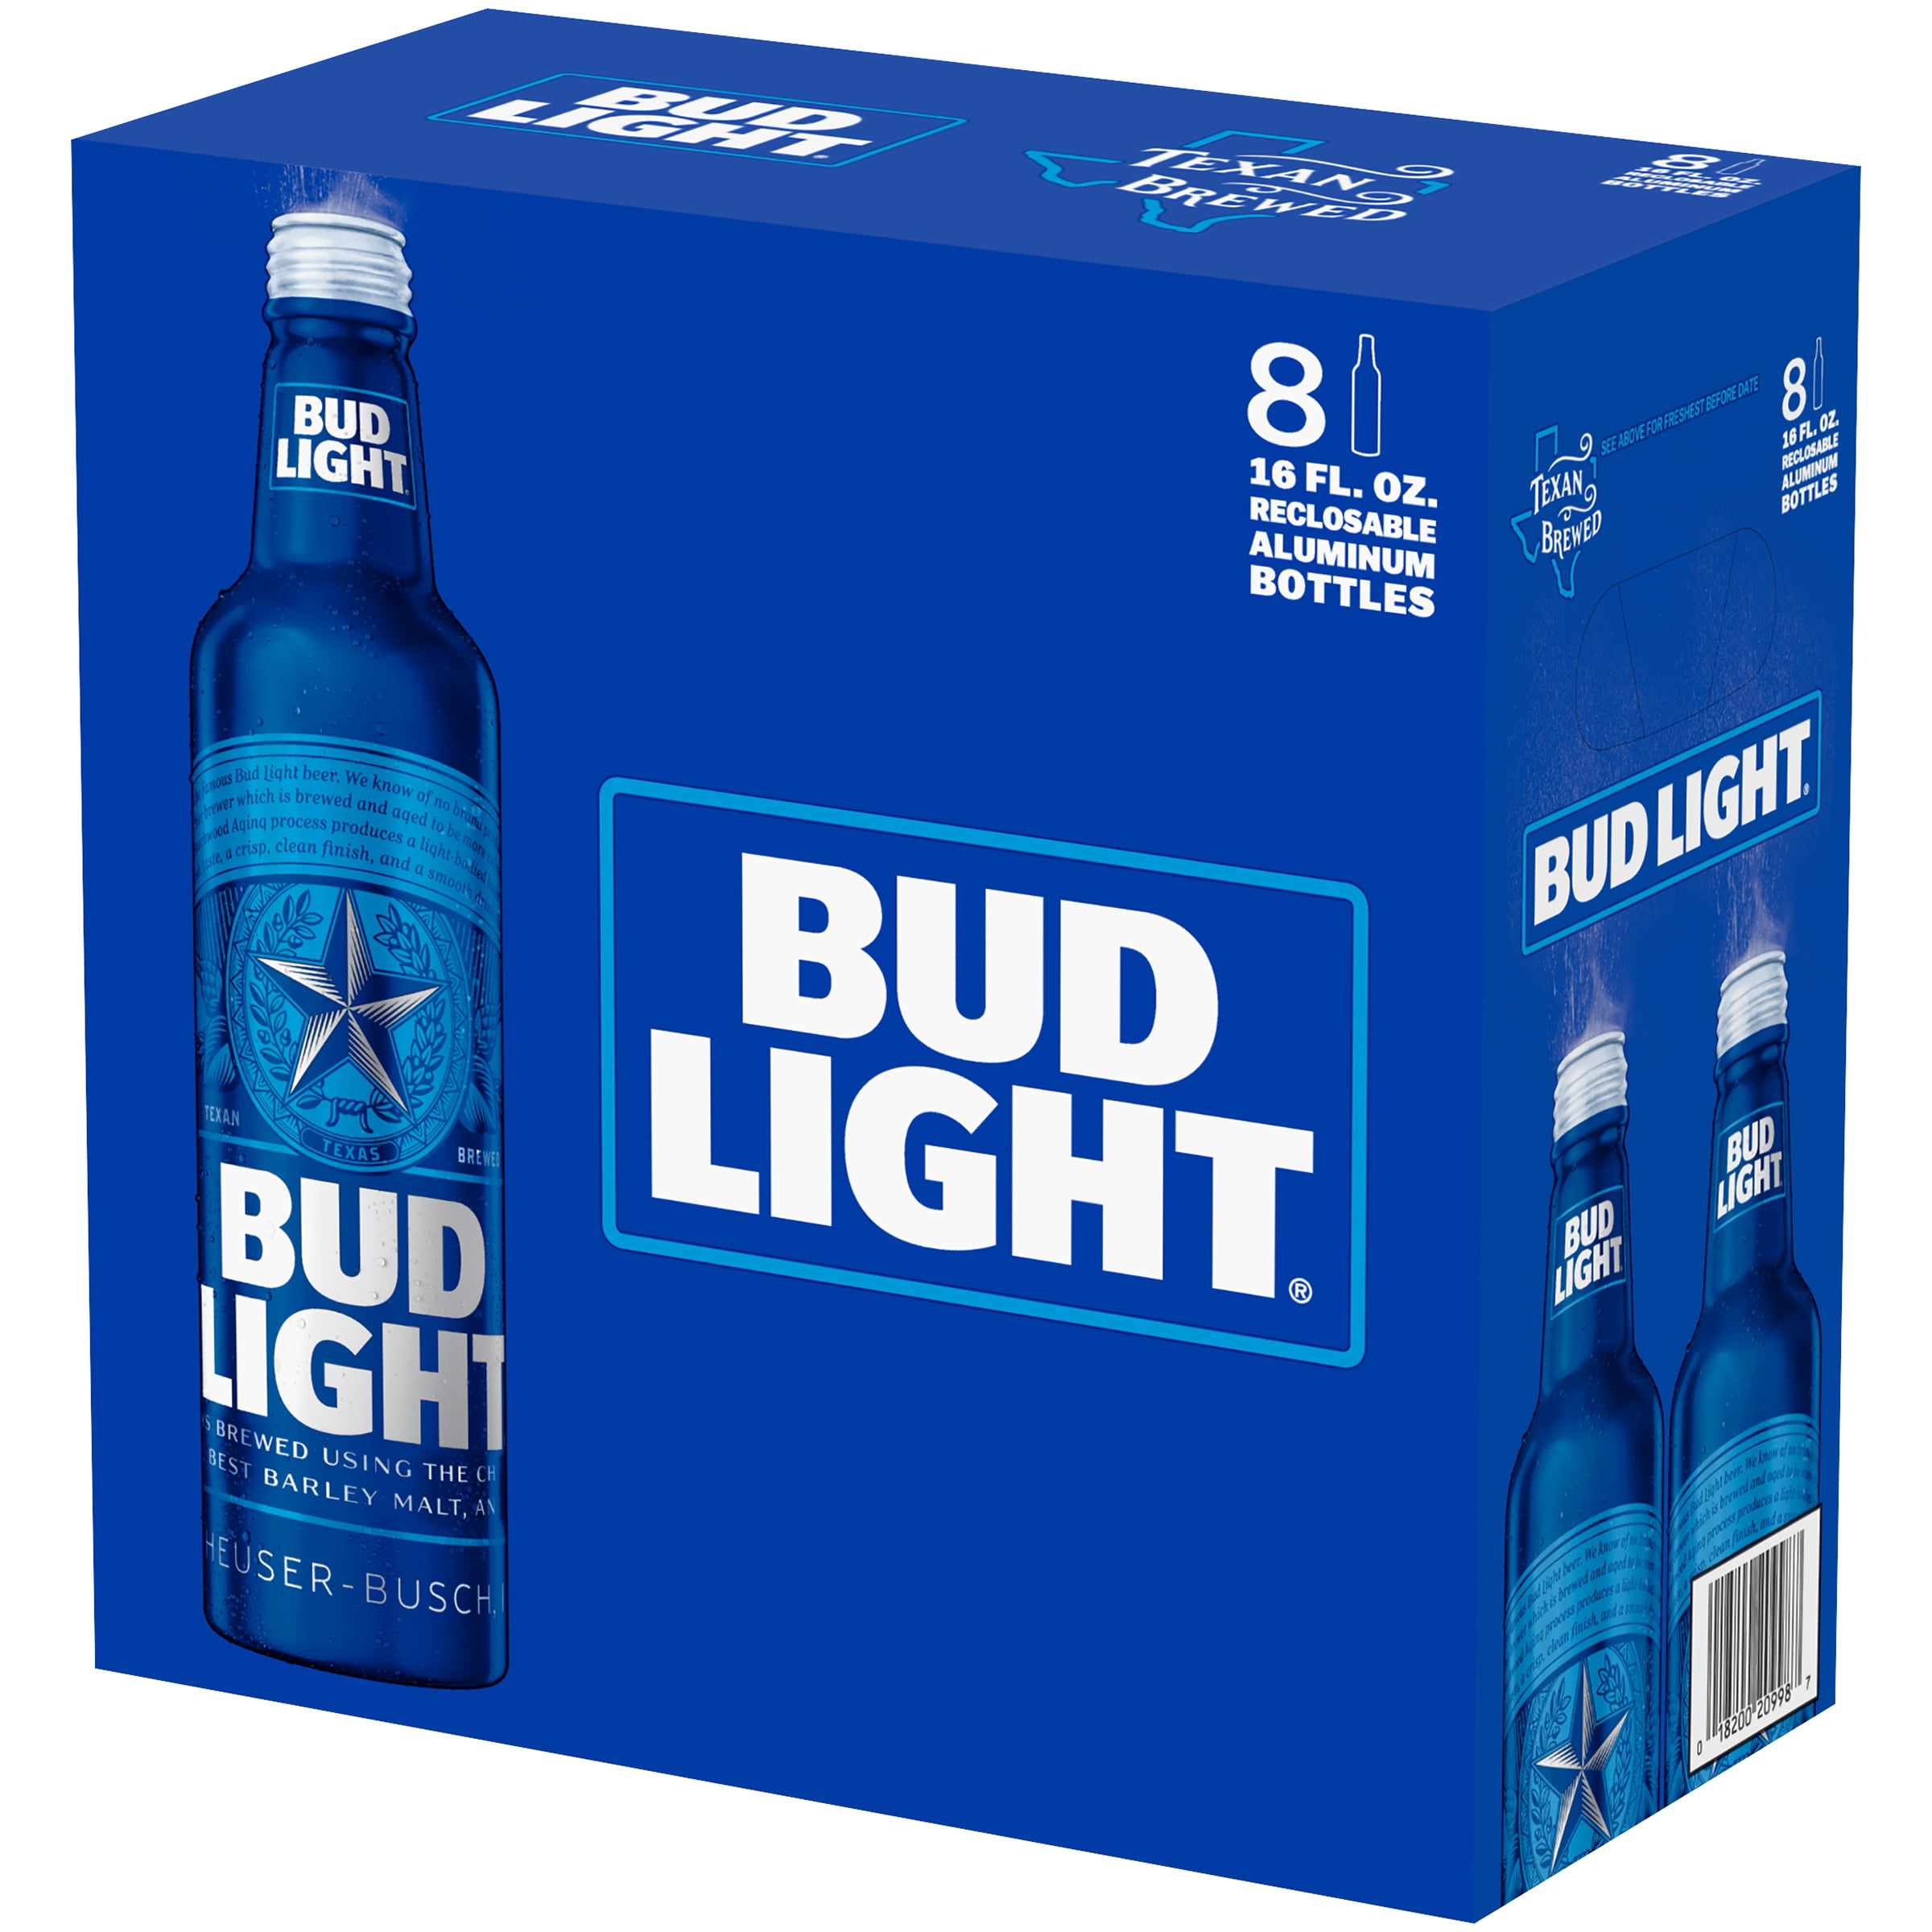 Bud Light Alcohol By Volume Texas.